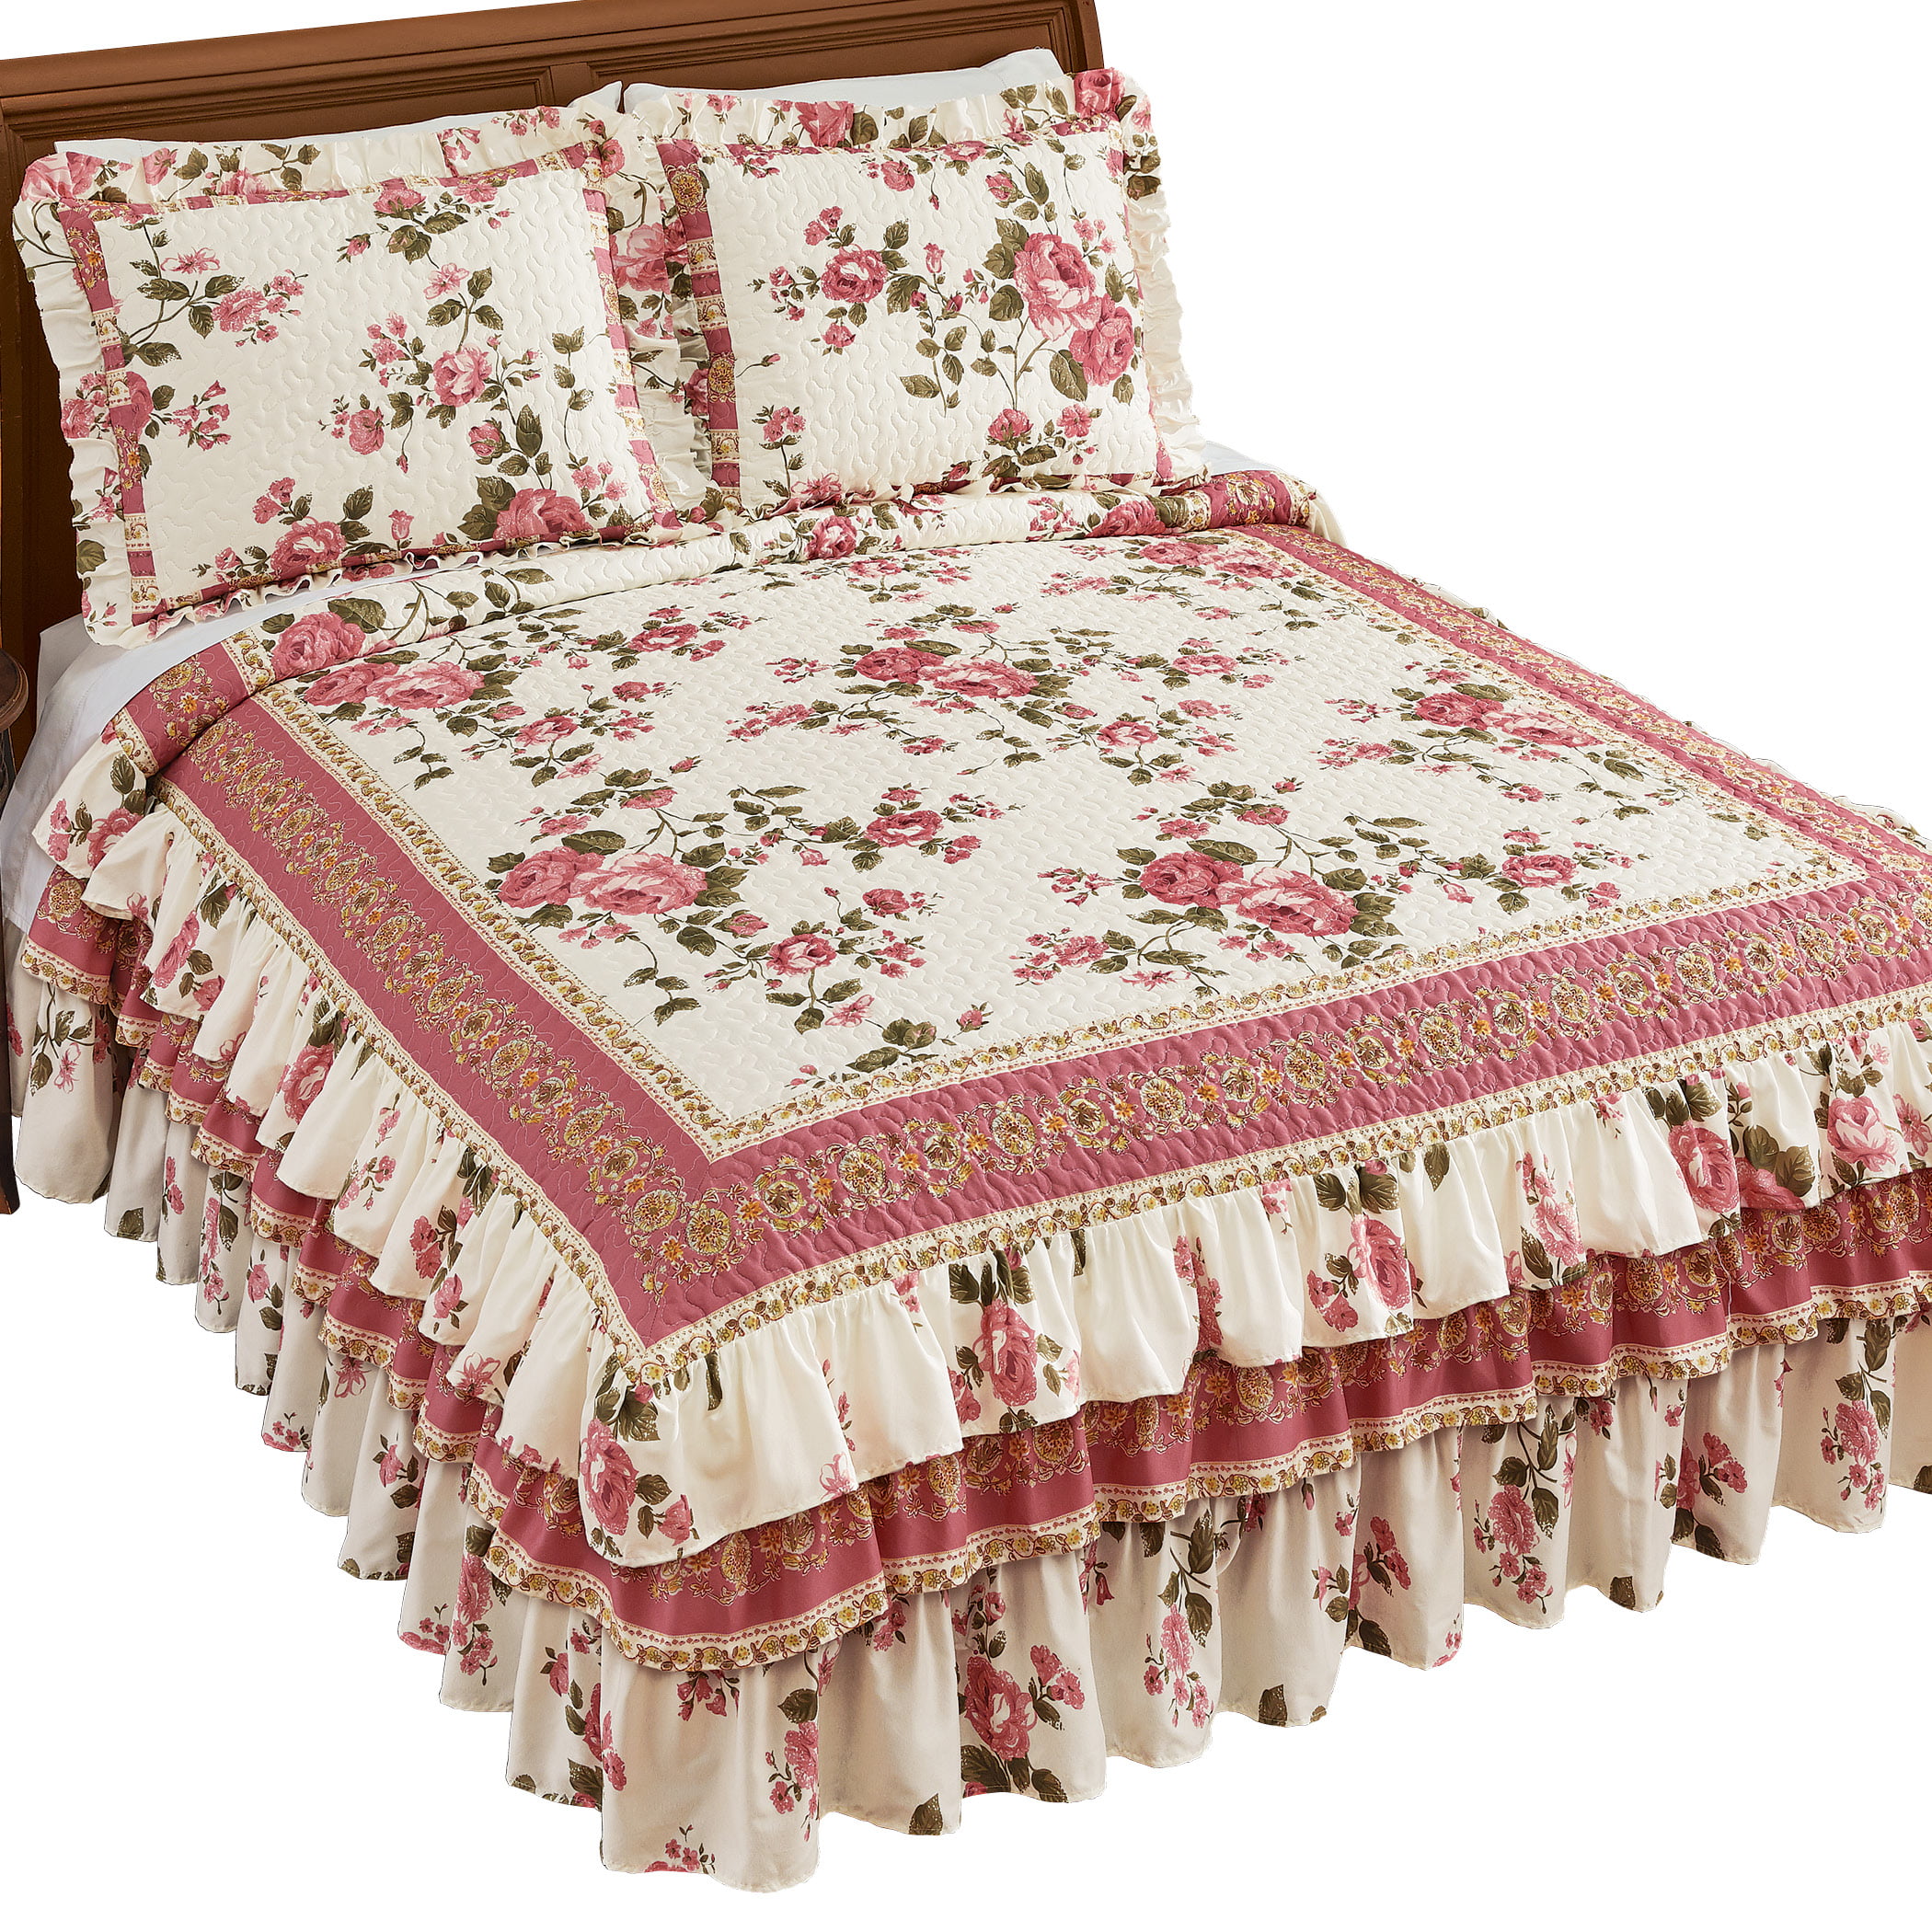 Queen Quilt Set Chic Floral Pink Roses Details about   Rose Garden Creamy White Full 